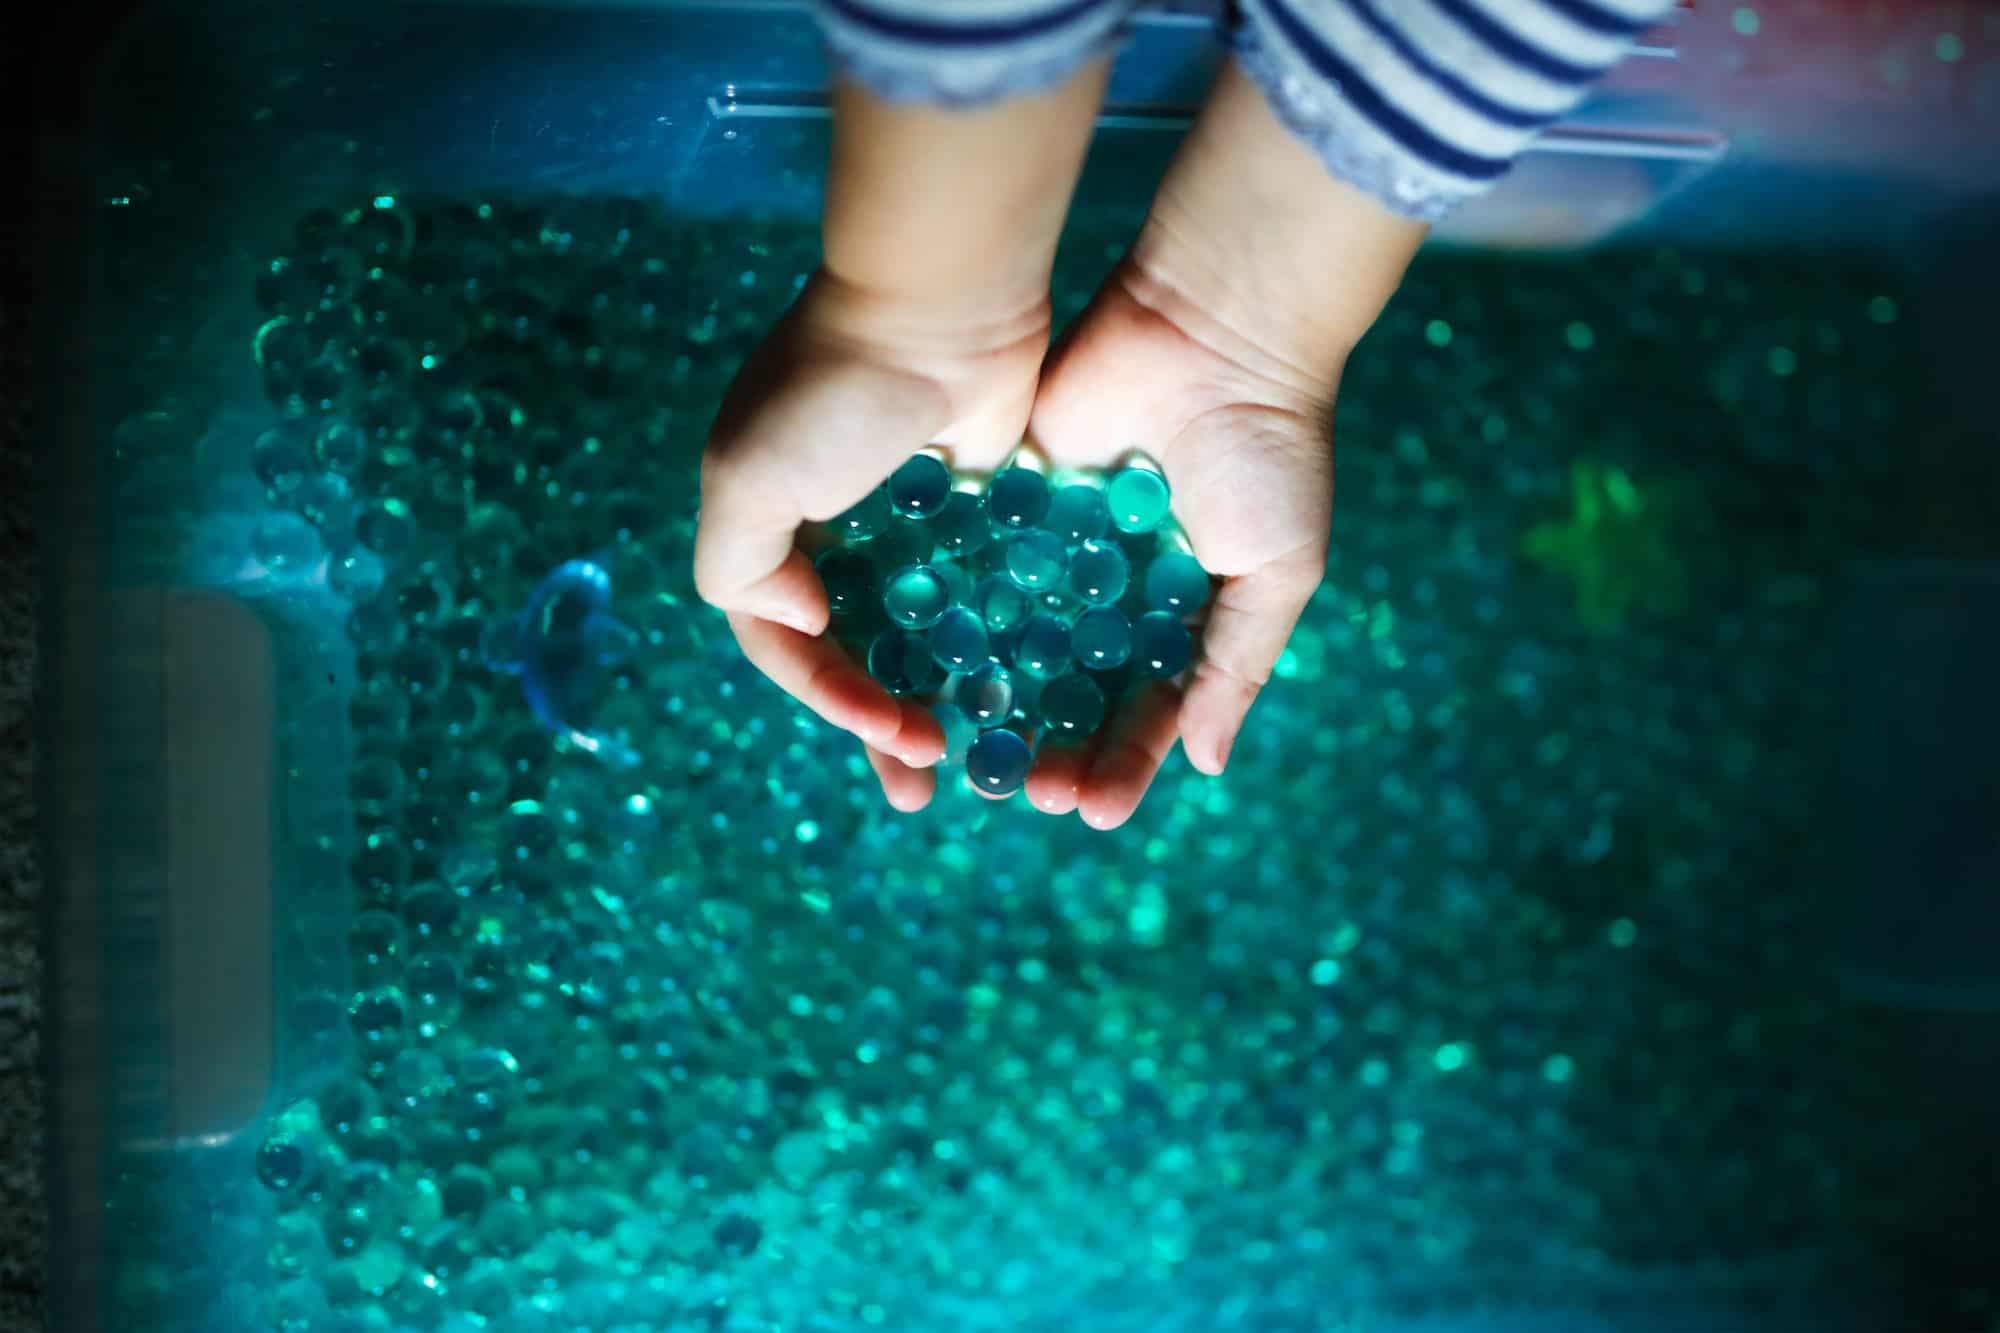 Child plays with hydrogel sensory box, children's hands touch play with blue water beads